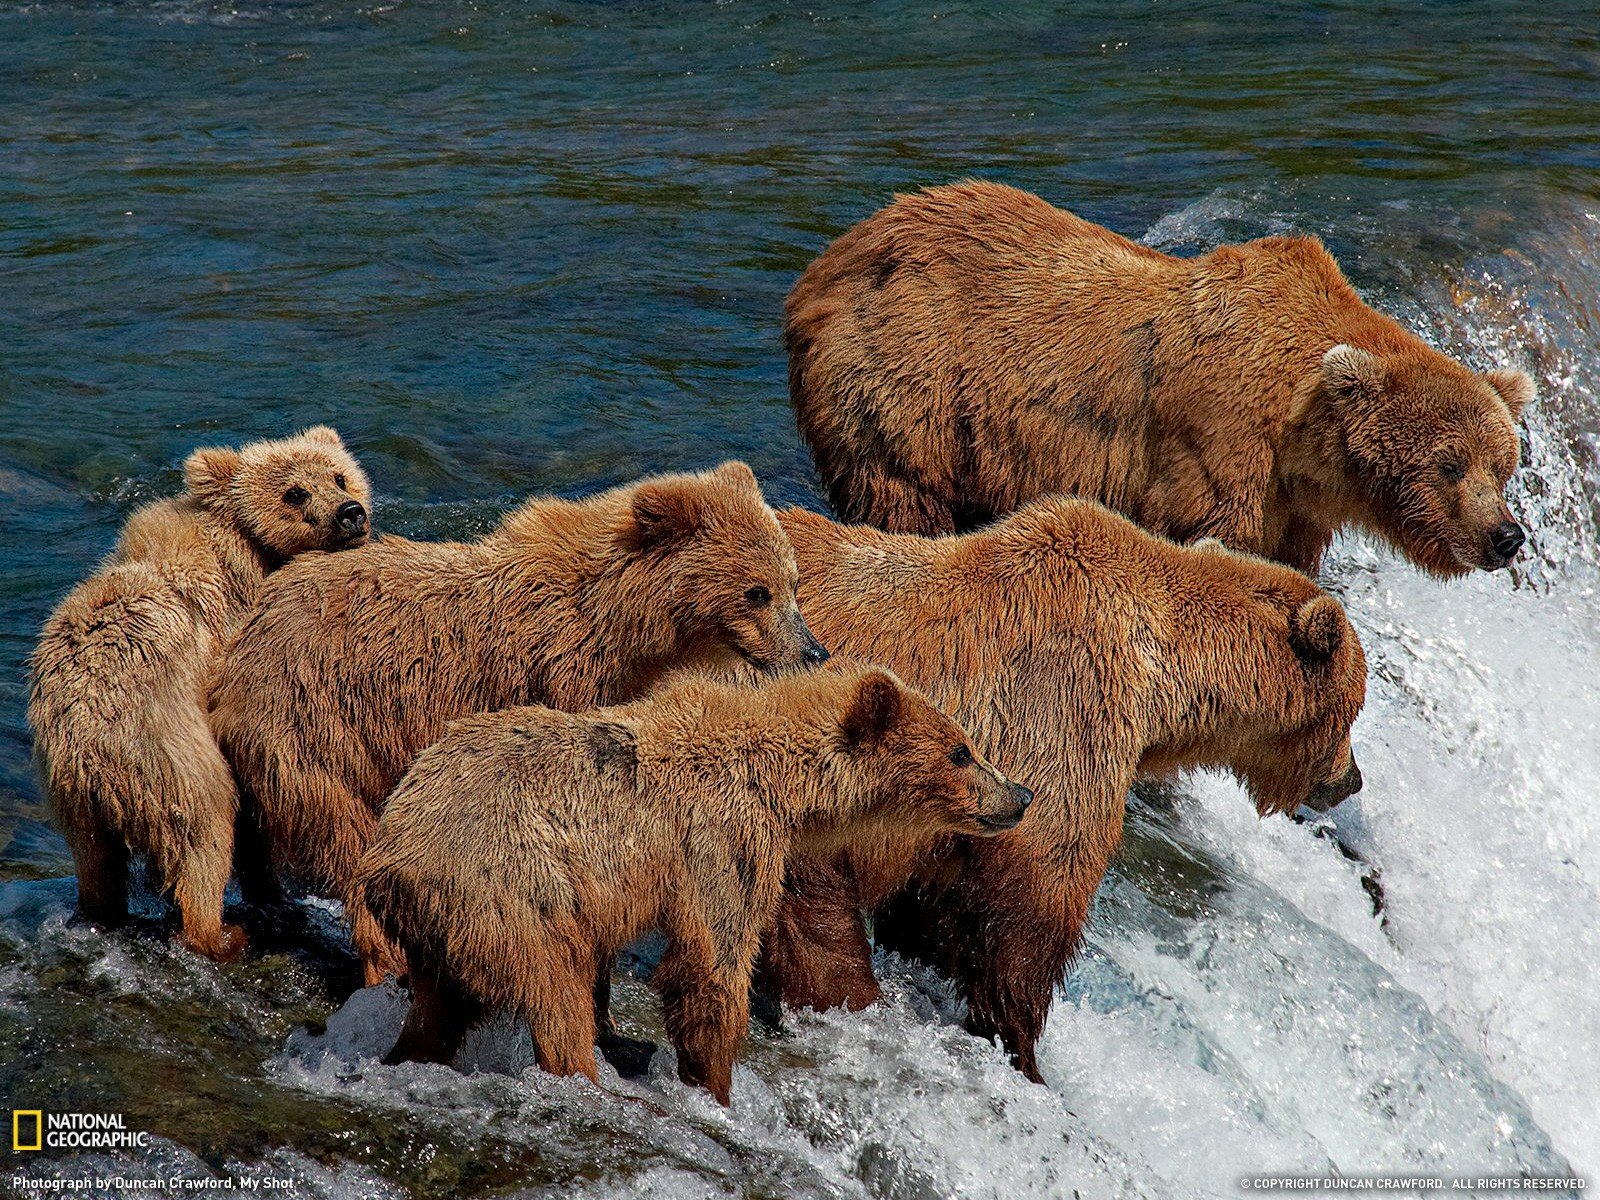 Grizzly Bears Wallpaper